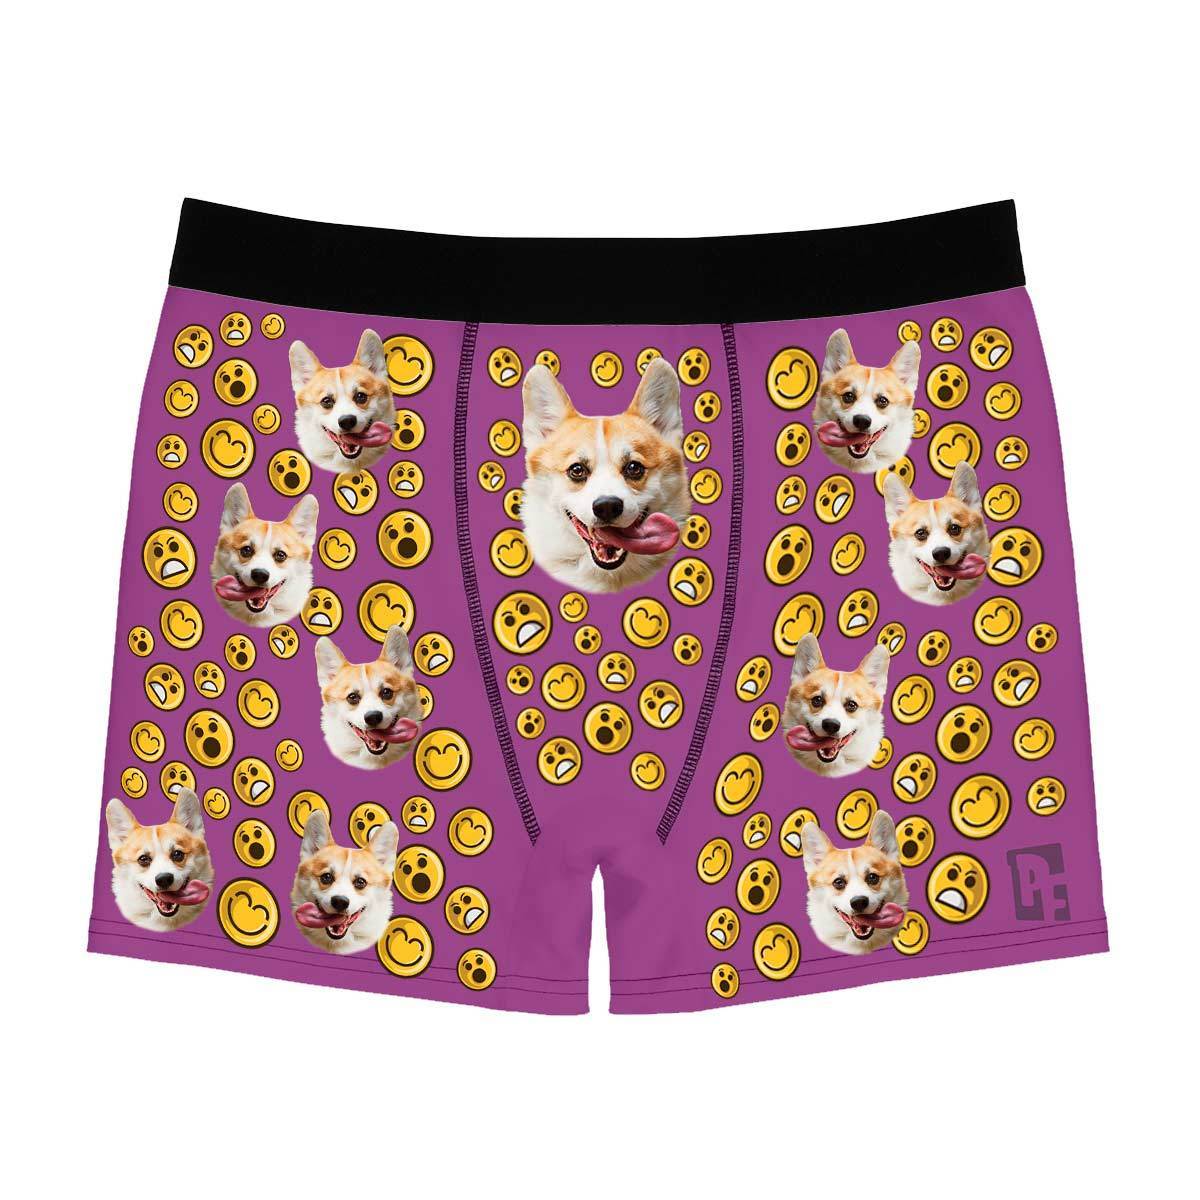 Purple Smiles men's boxer briefs personalized with photo printed on them